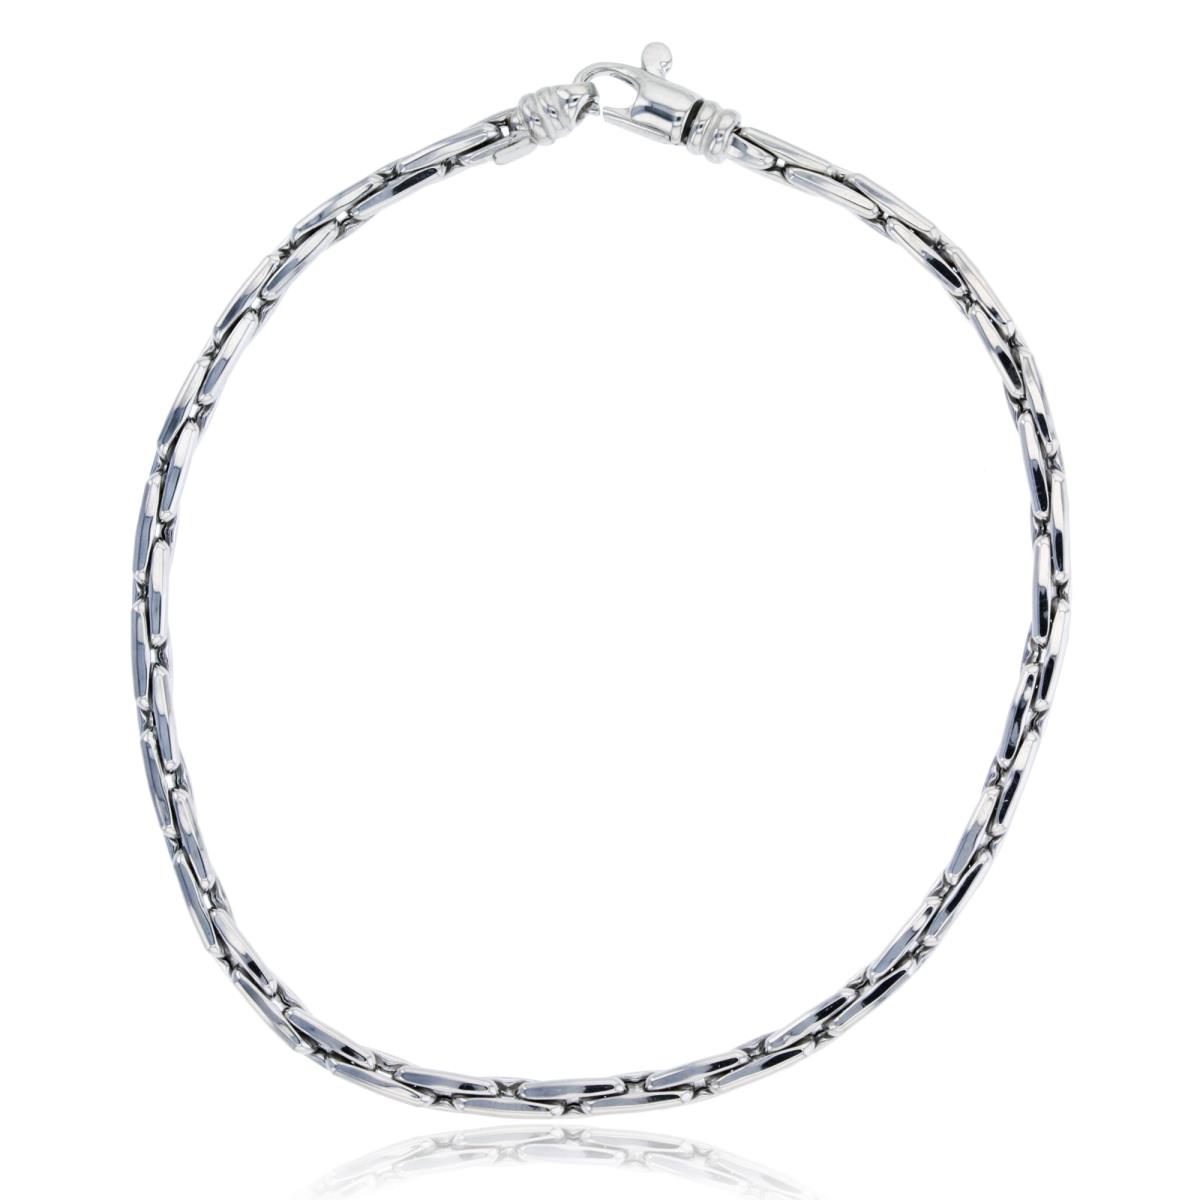 14K White Gold 3.30mm Fancy Elongated Square Cable 7.75" Chain Bracelet